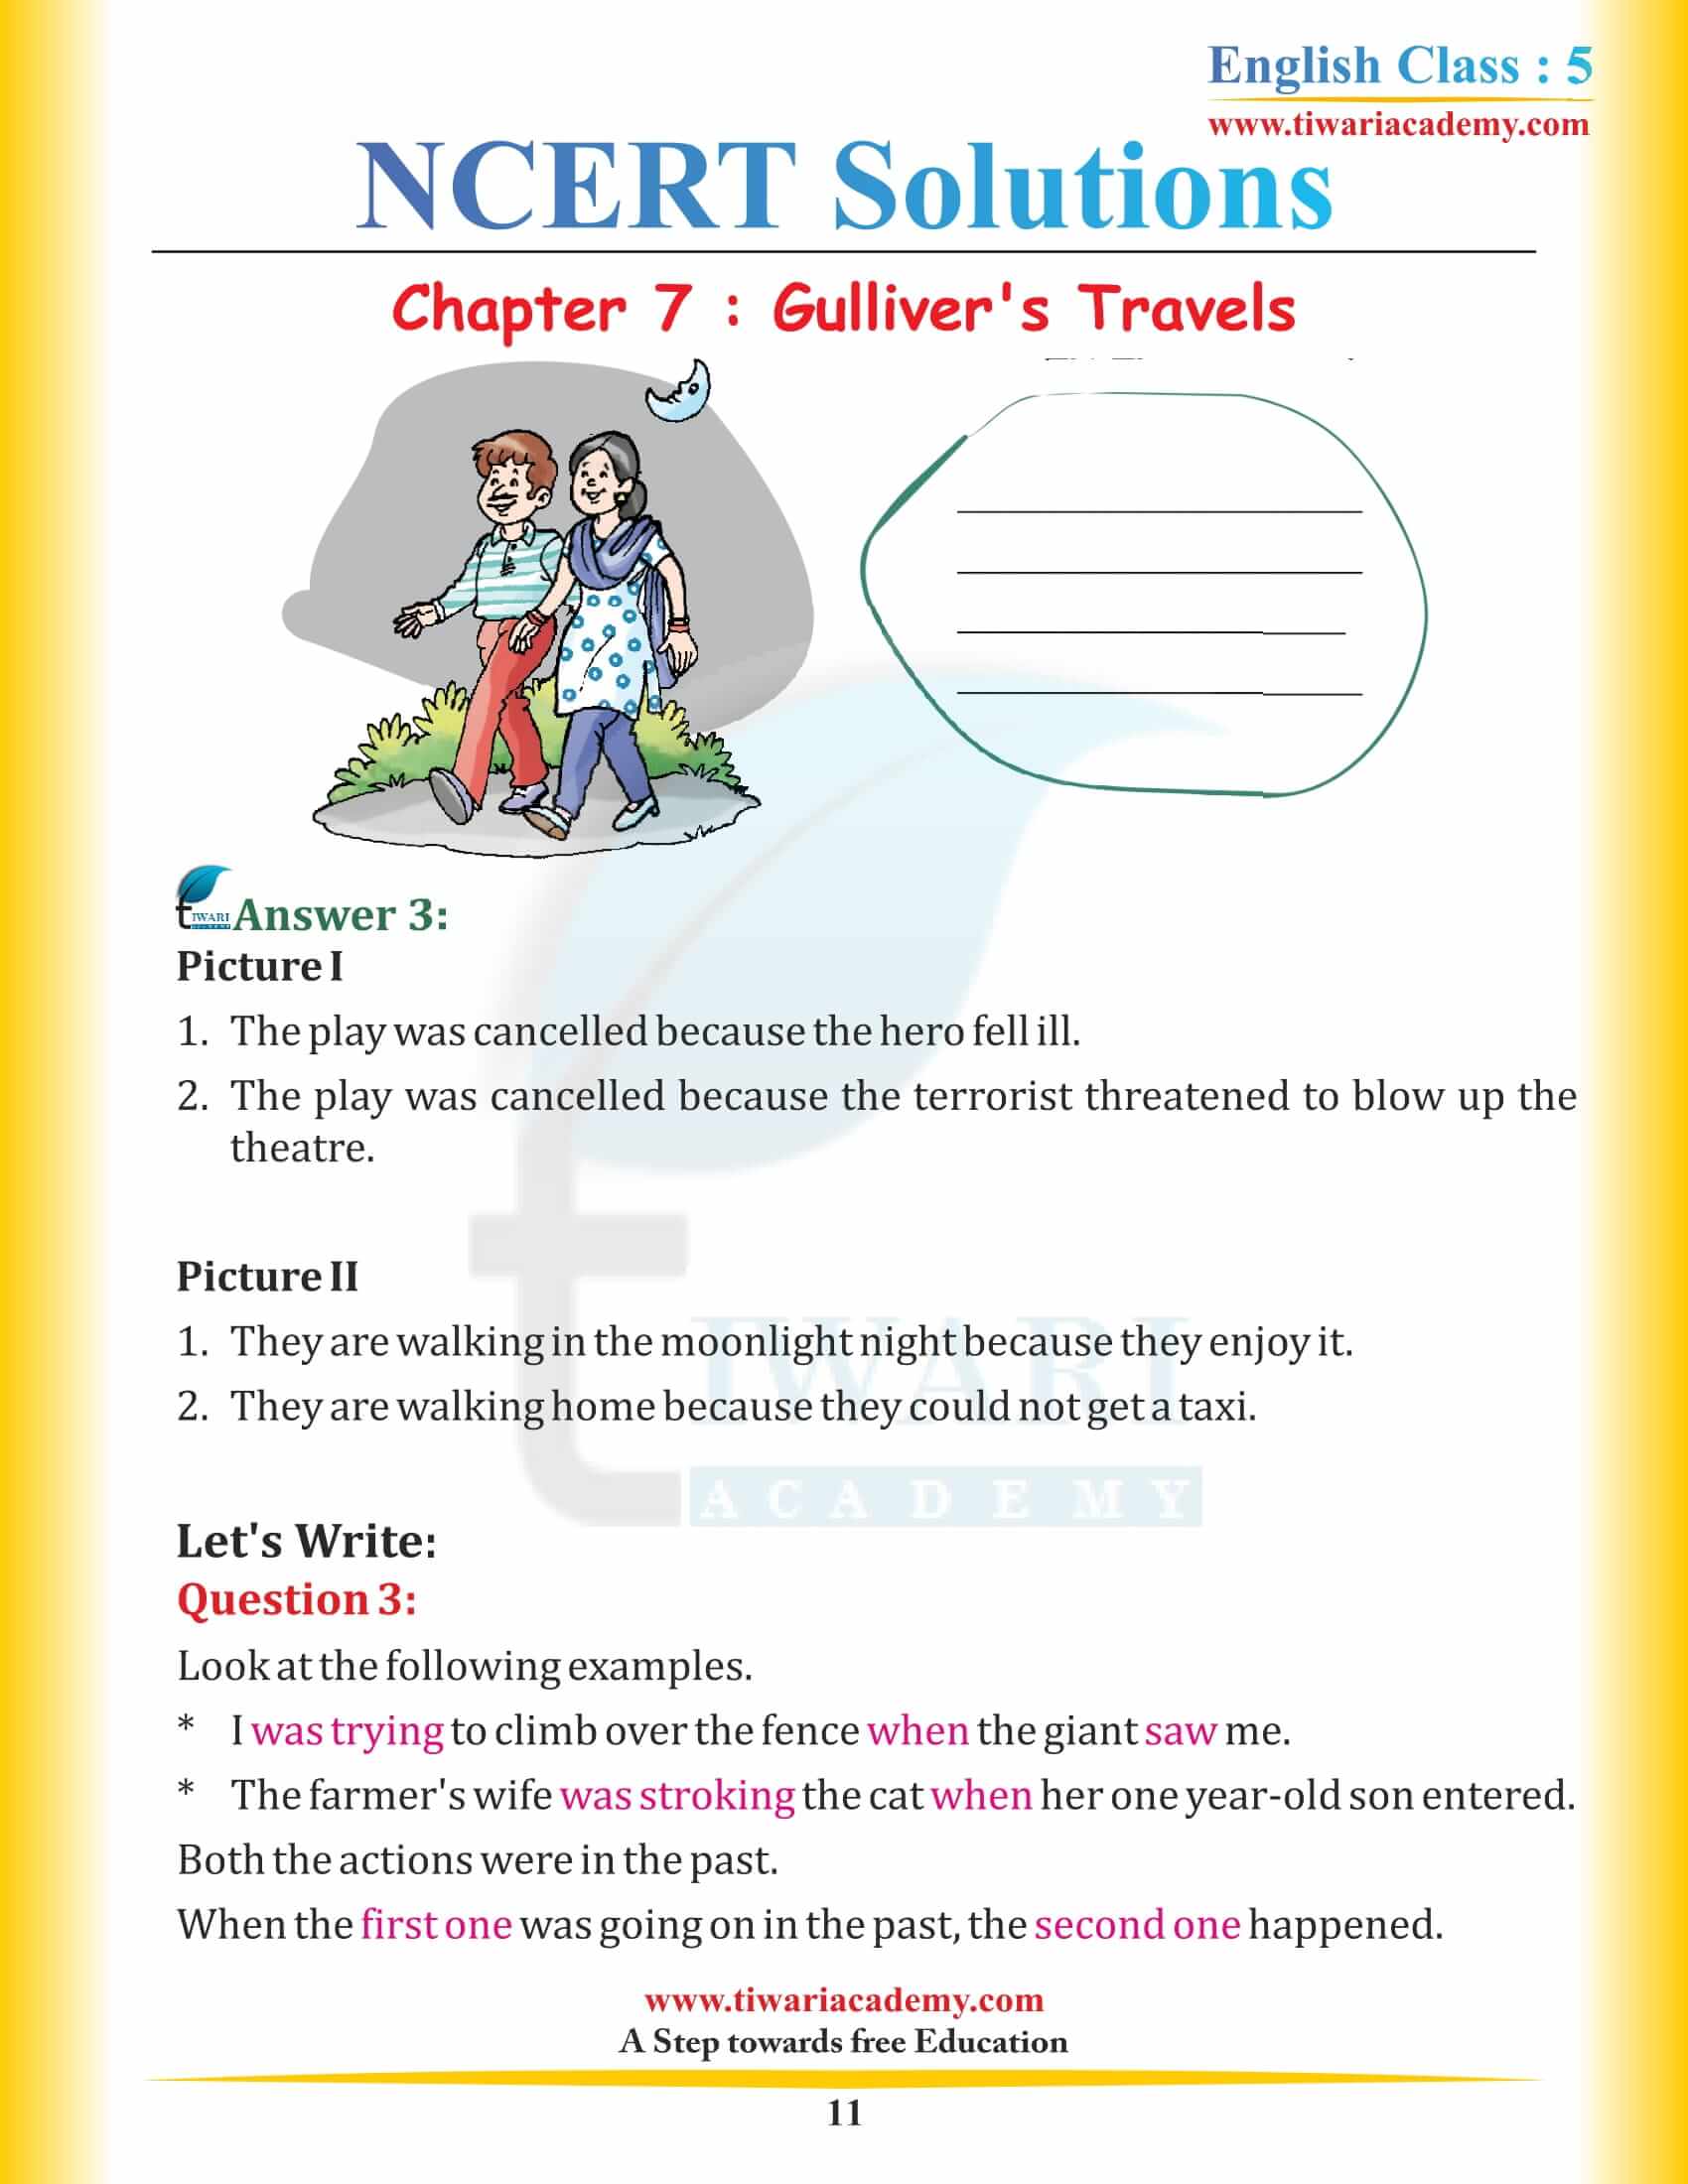 NCERT Solutions for Class 5 English Chapter 7 Gulliver’s Travels all question answers